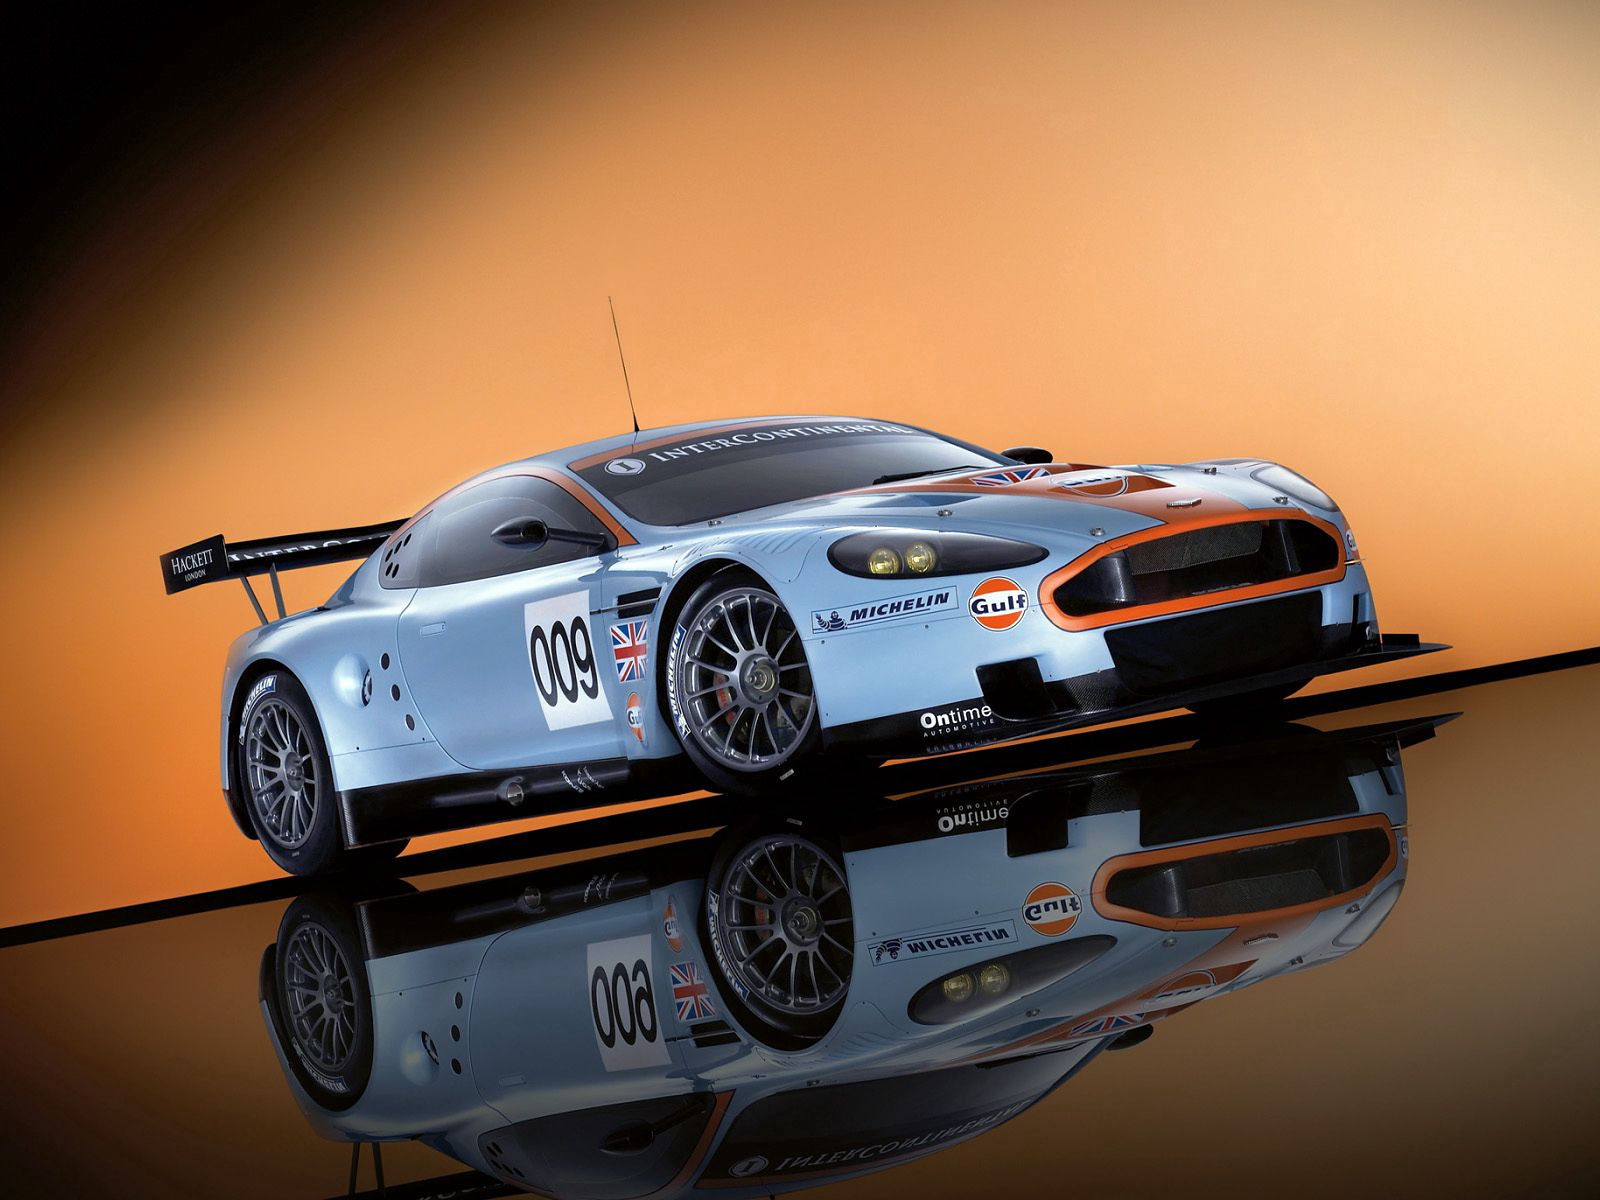 cars, auto, sports, aston martin, white, reflection, side view, style, 2008, dbr9 cellphone